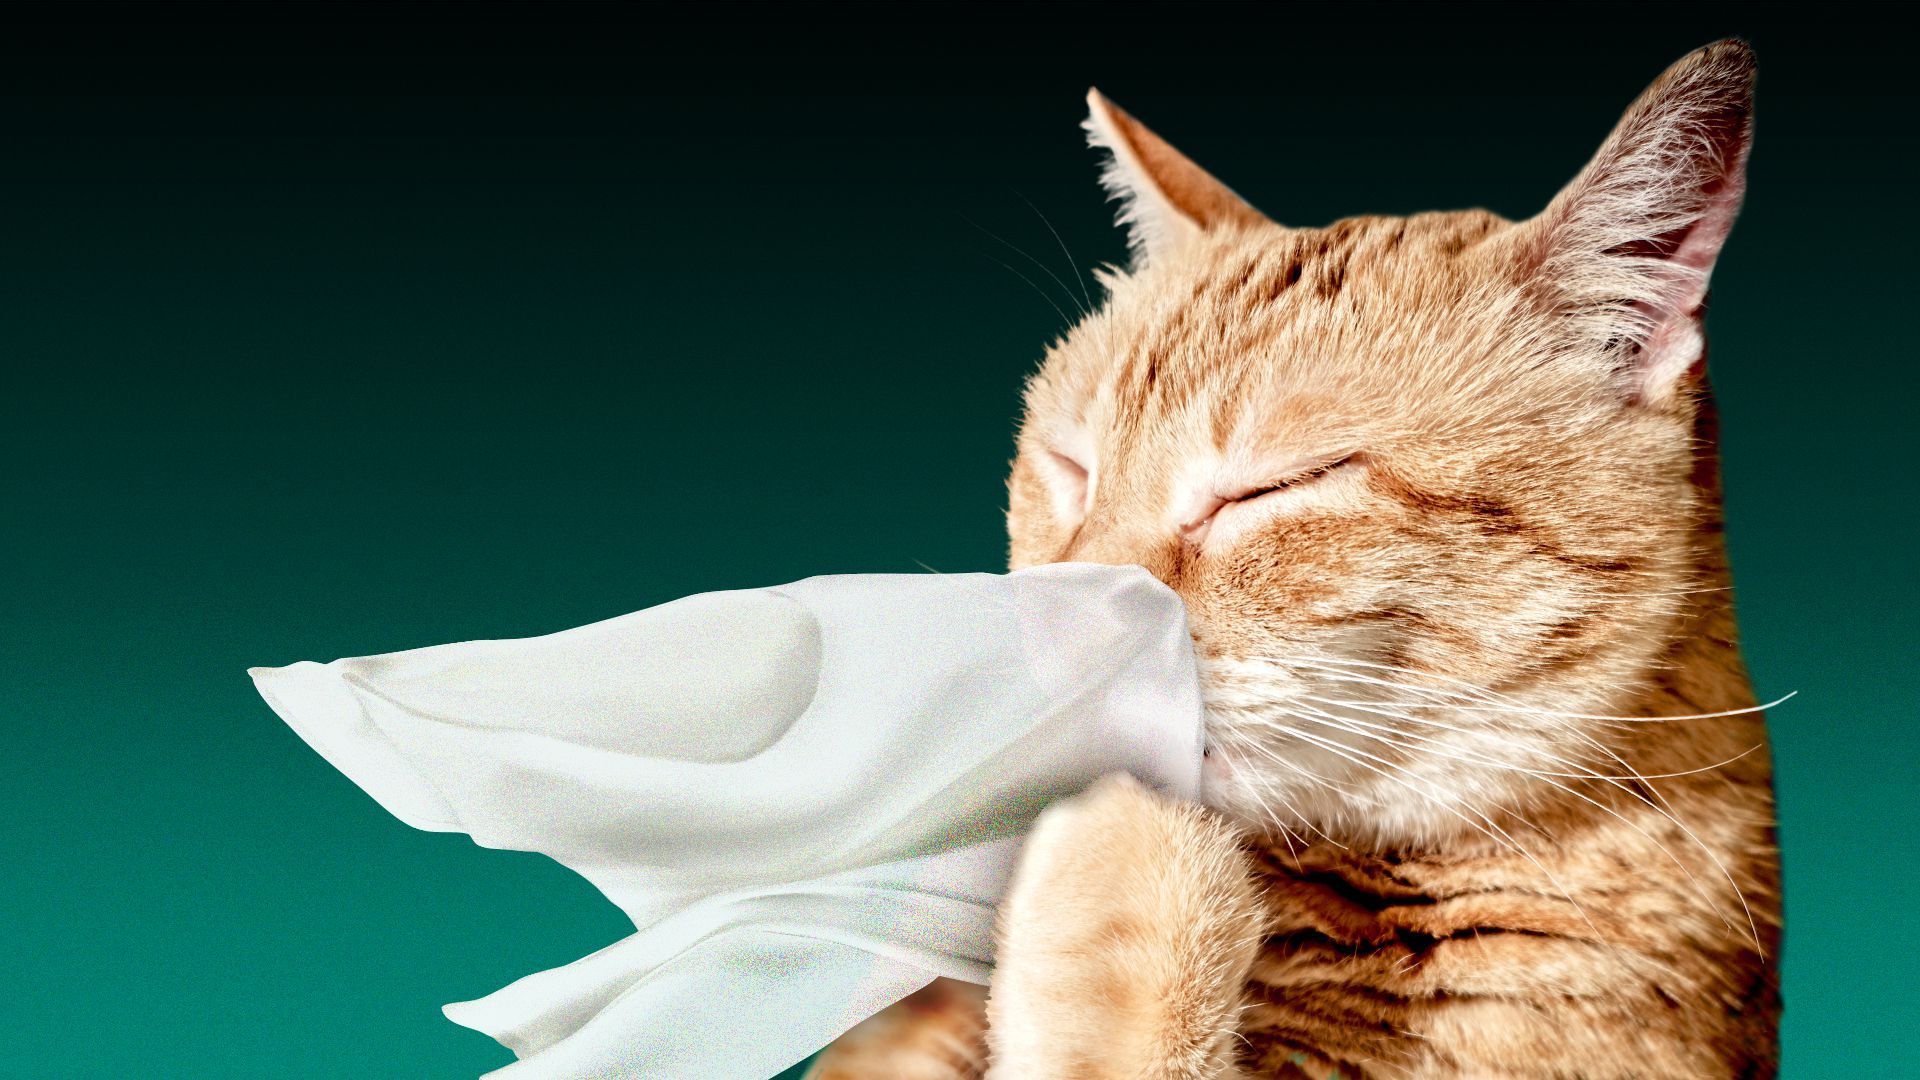 Illustration of an orange cat blowing their nose into a tissue